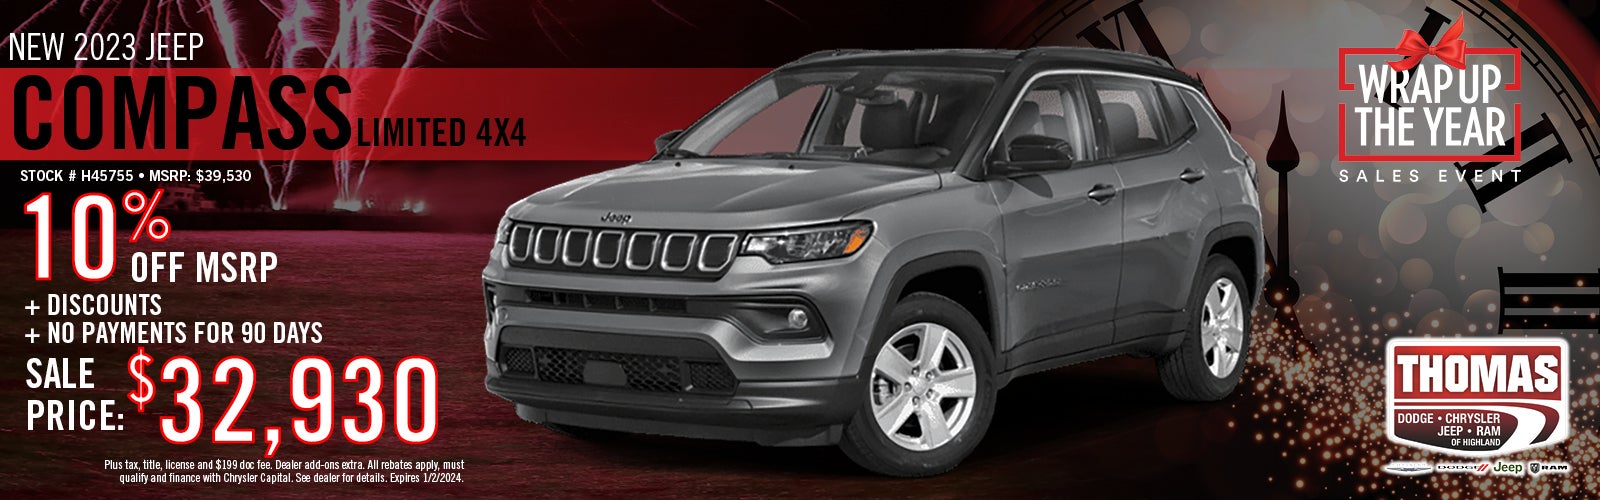  New 2023 Jeep Compass Buy Offer